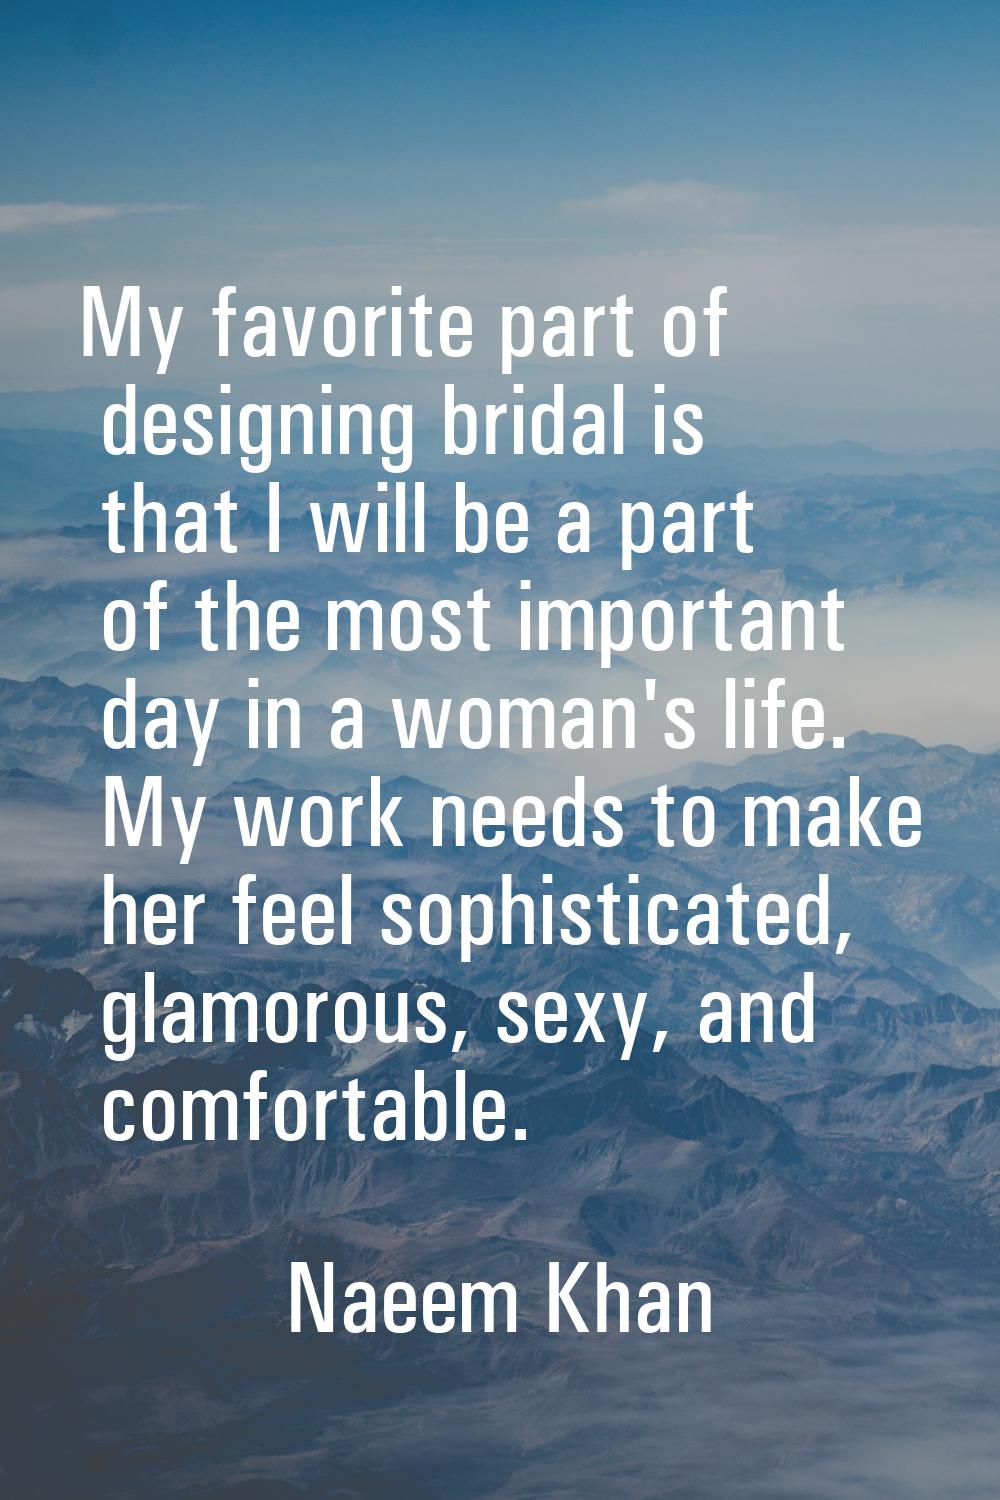 My favorite part of designing bridal is that I will be a part of the most important day in a woman'